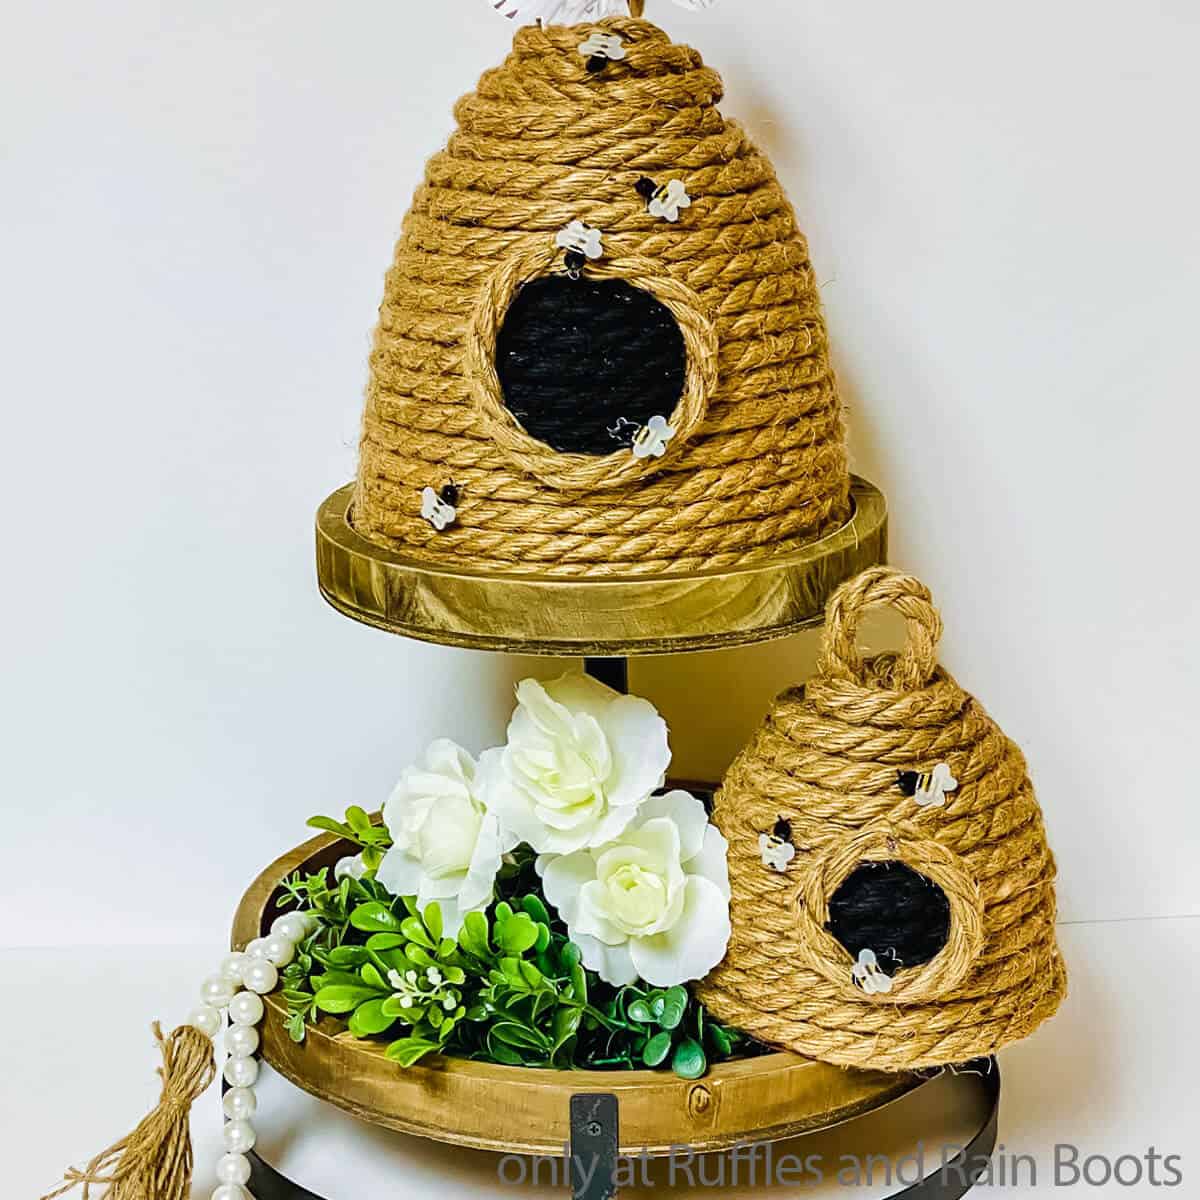 Square close up image of two sizes of DIY beehive crafts made with rope on a tiered tray with greenery and flowers.